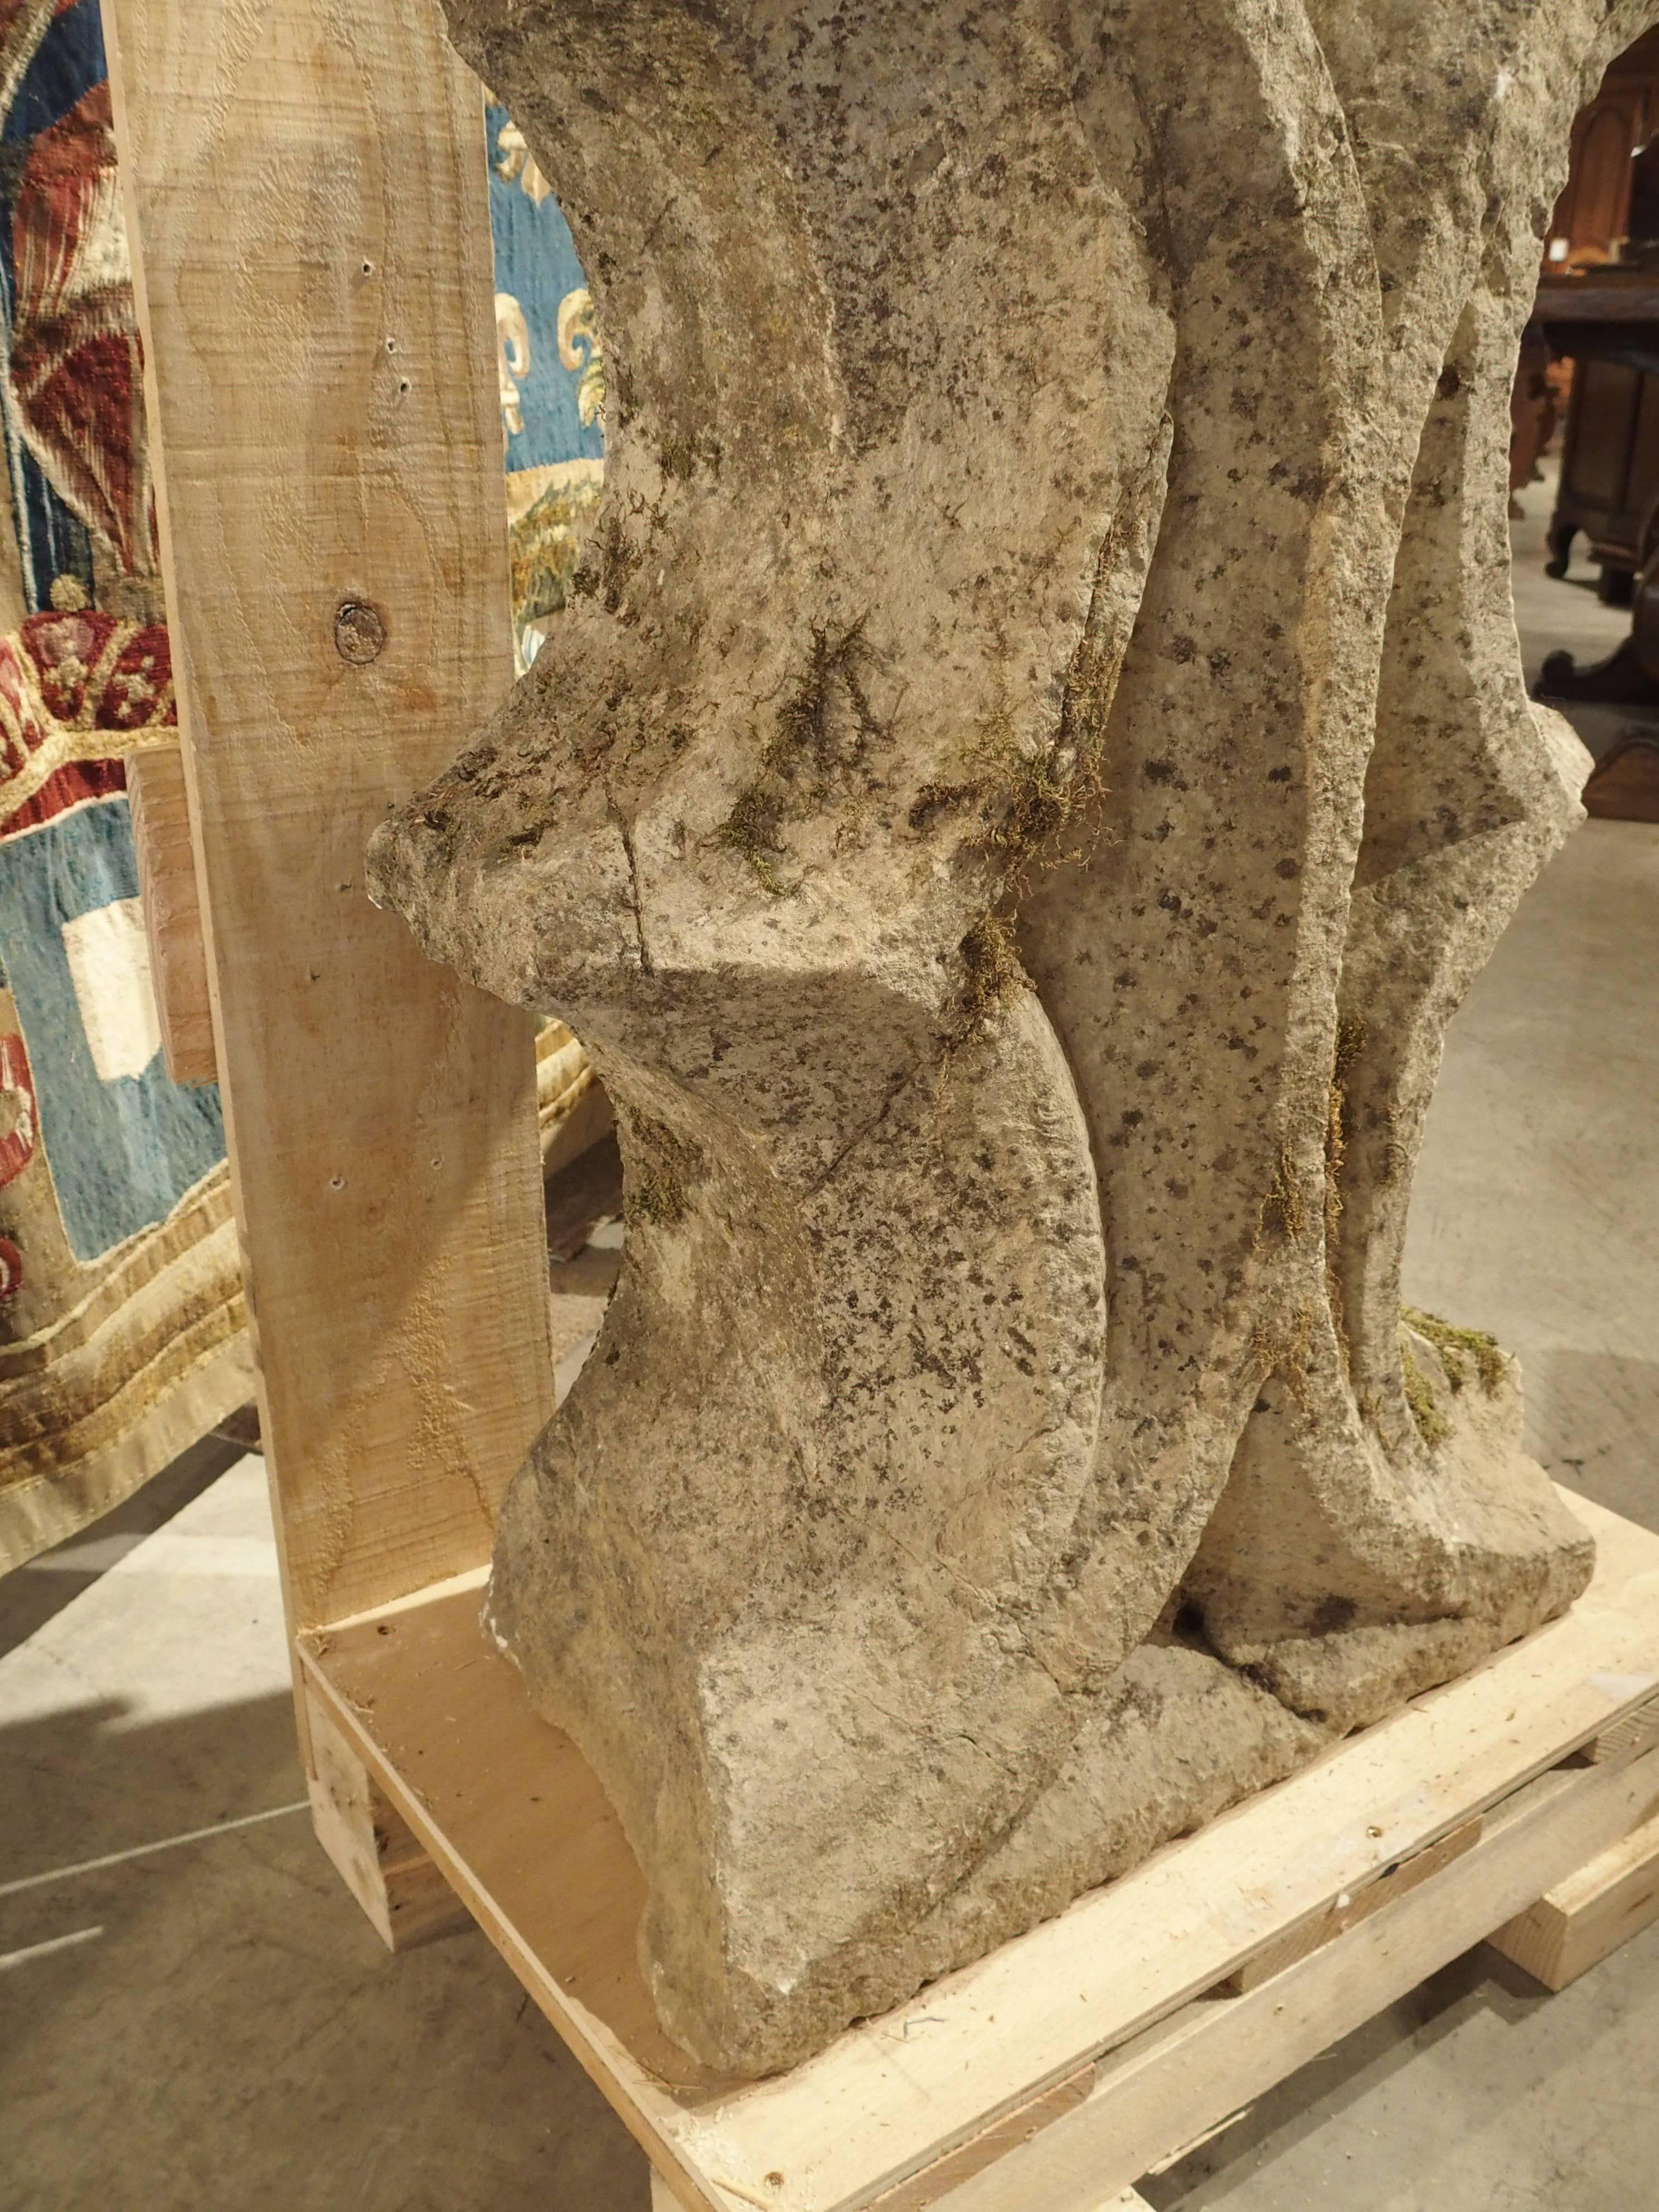 Gothic Period Architectural Stone Fragment from France, 15th Century 1